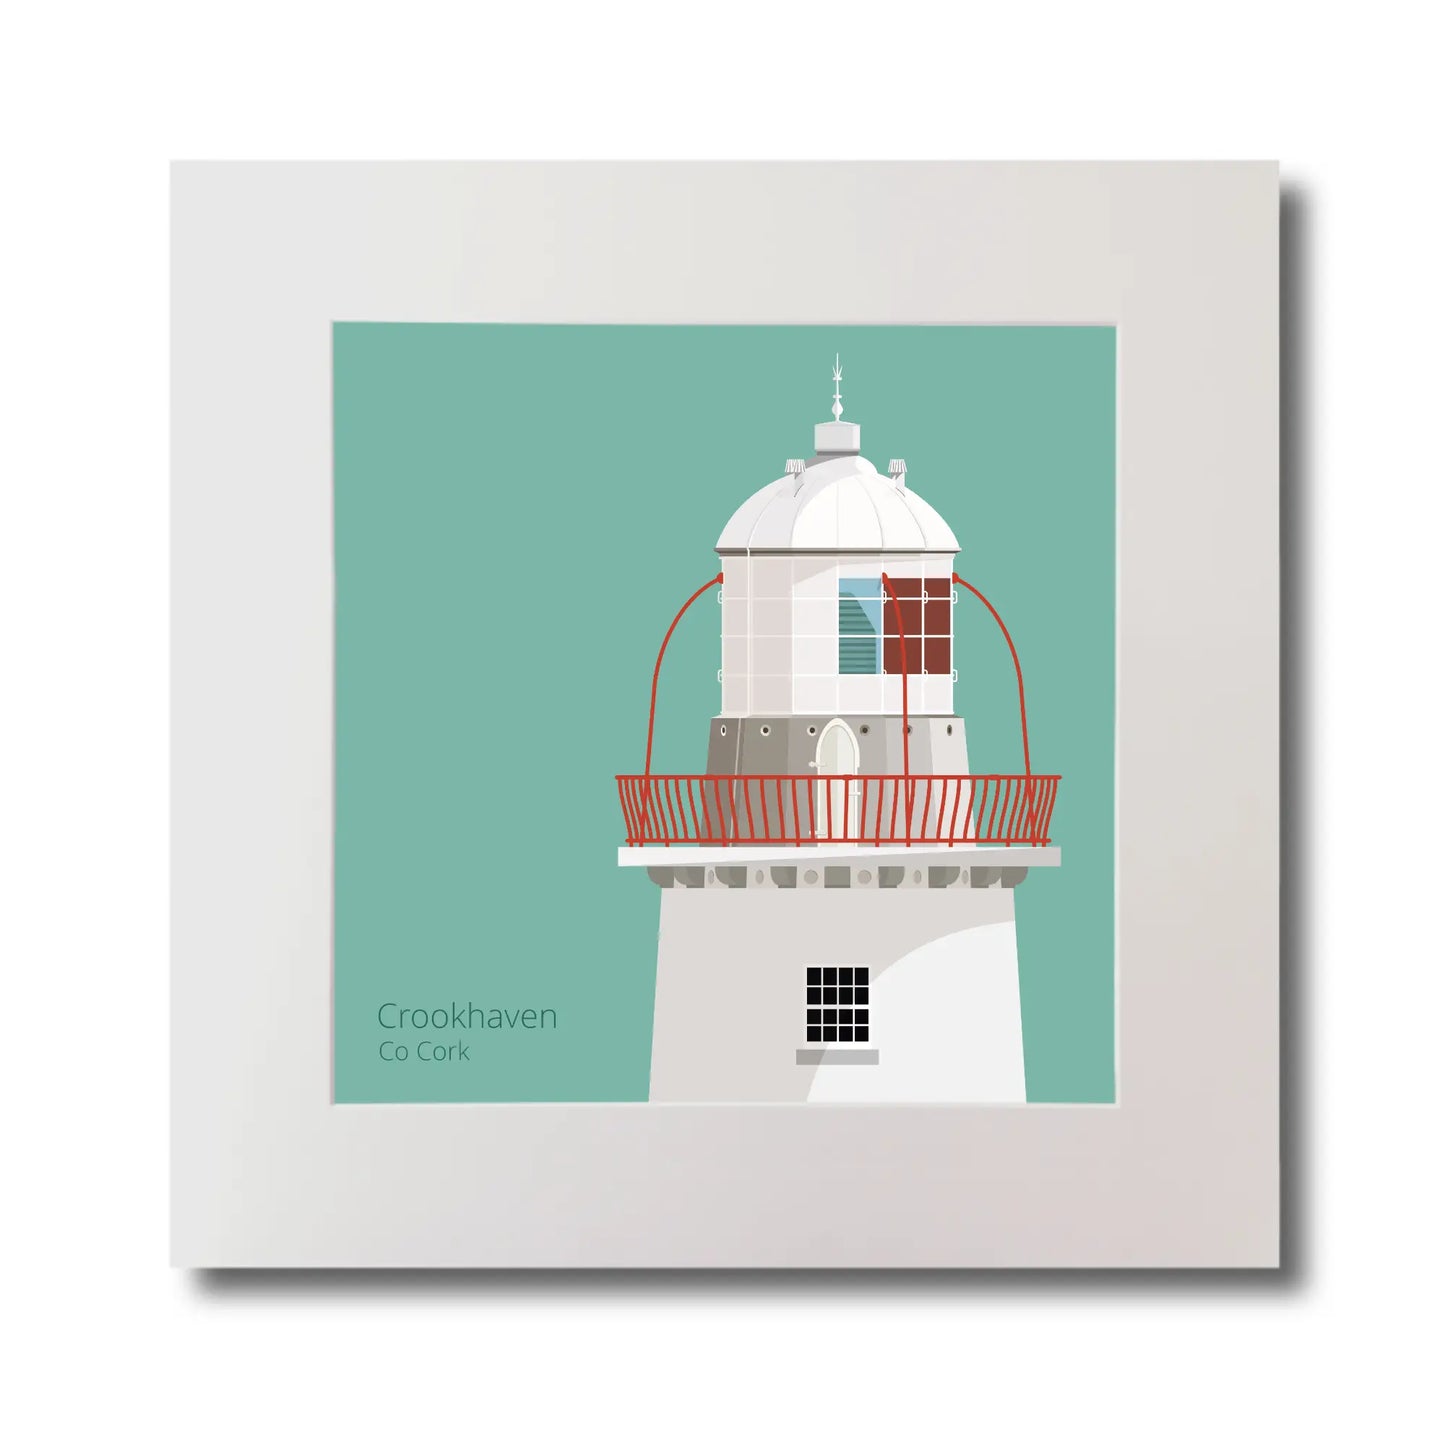 Illustration of Crookhaven lighthouse on an ocean green background, mounted and measuring 30x30cm.